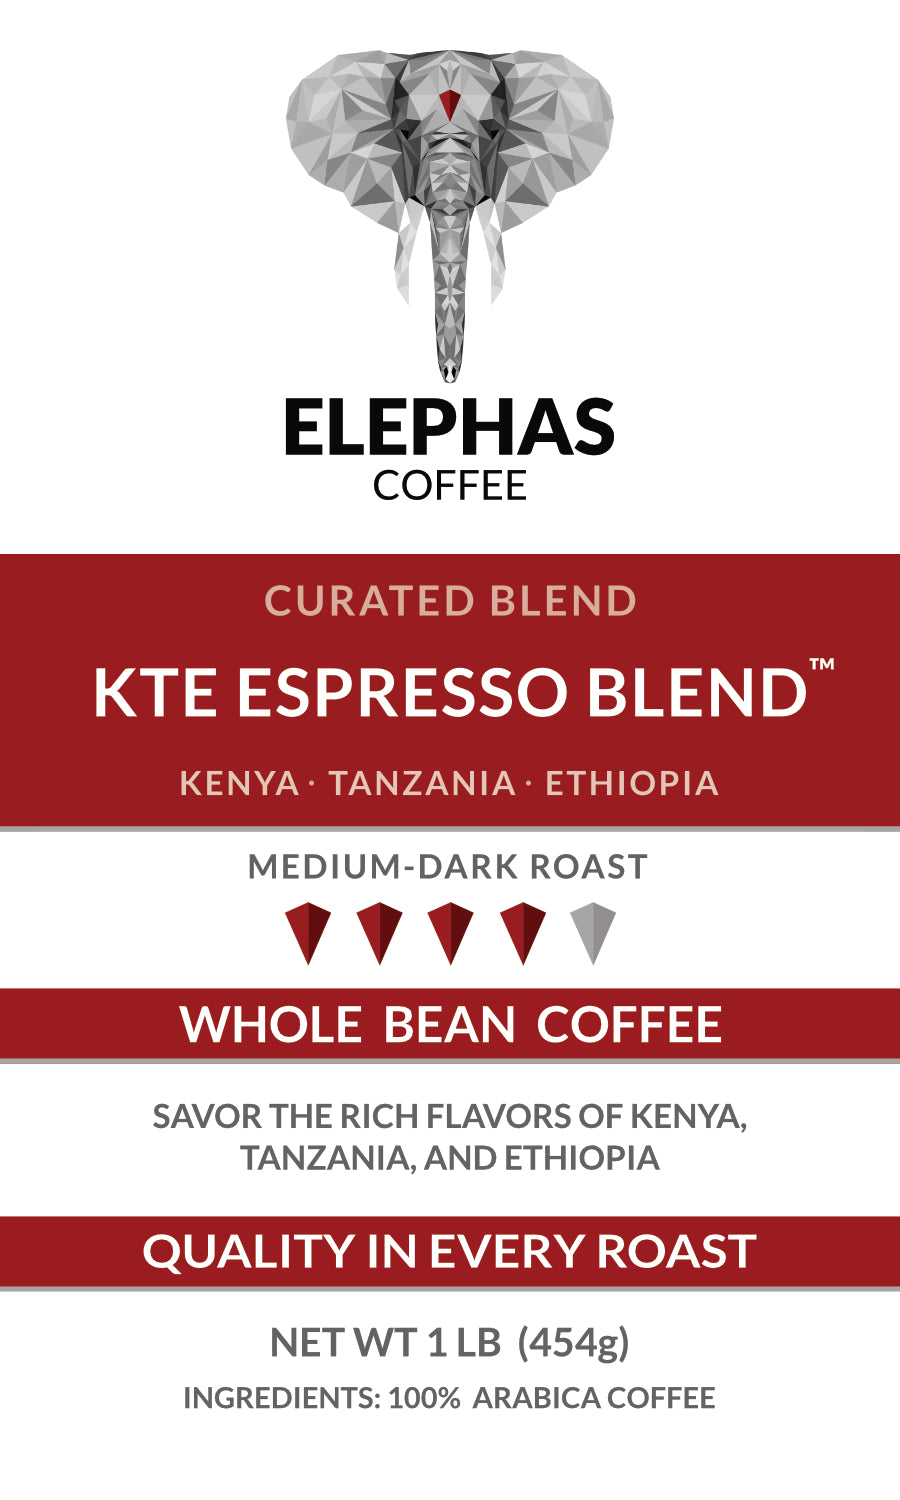 KTE Espresso Blend - Curated Coffee Blend - Subscriber Exclusive